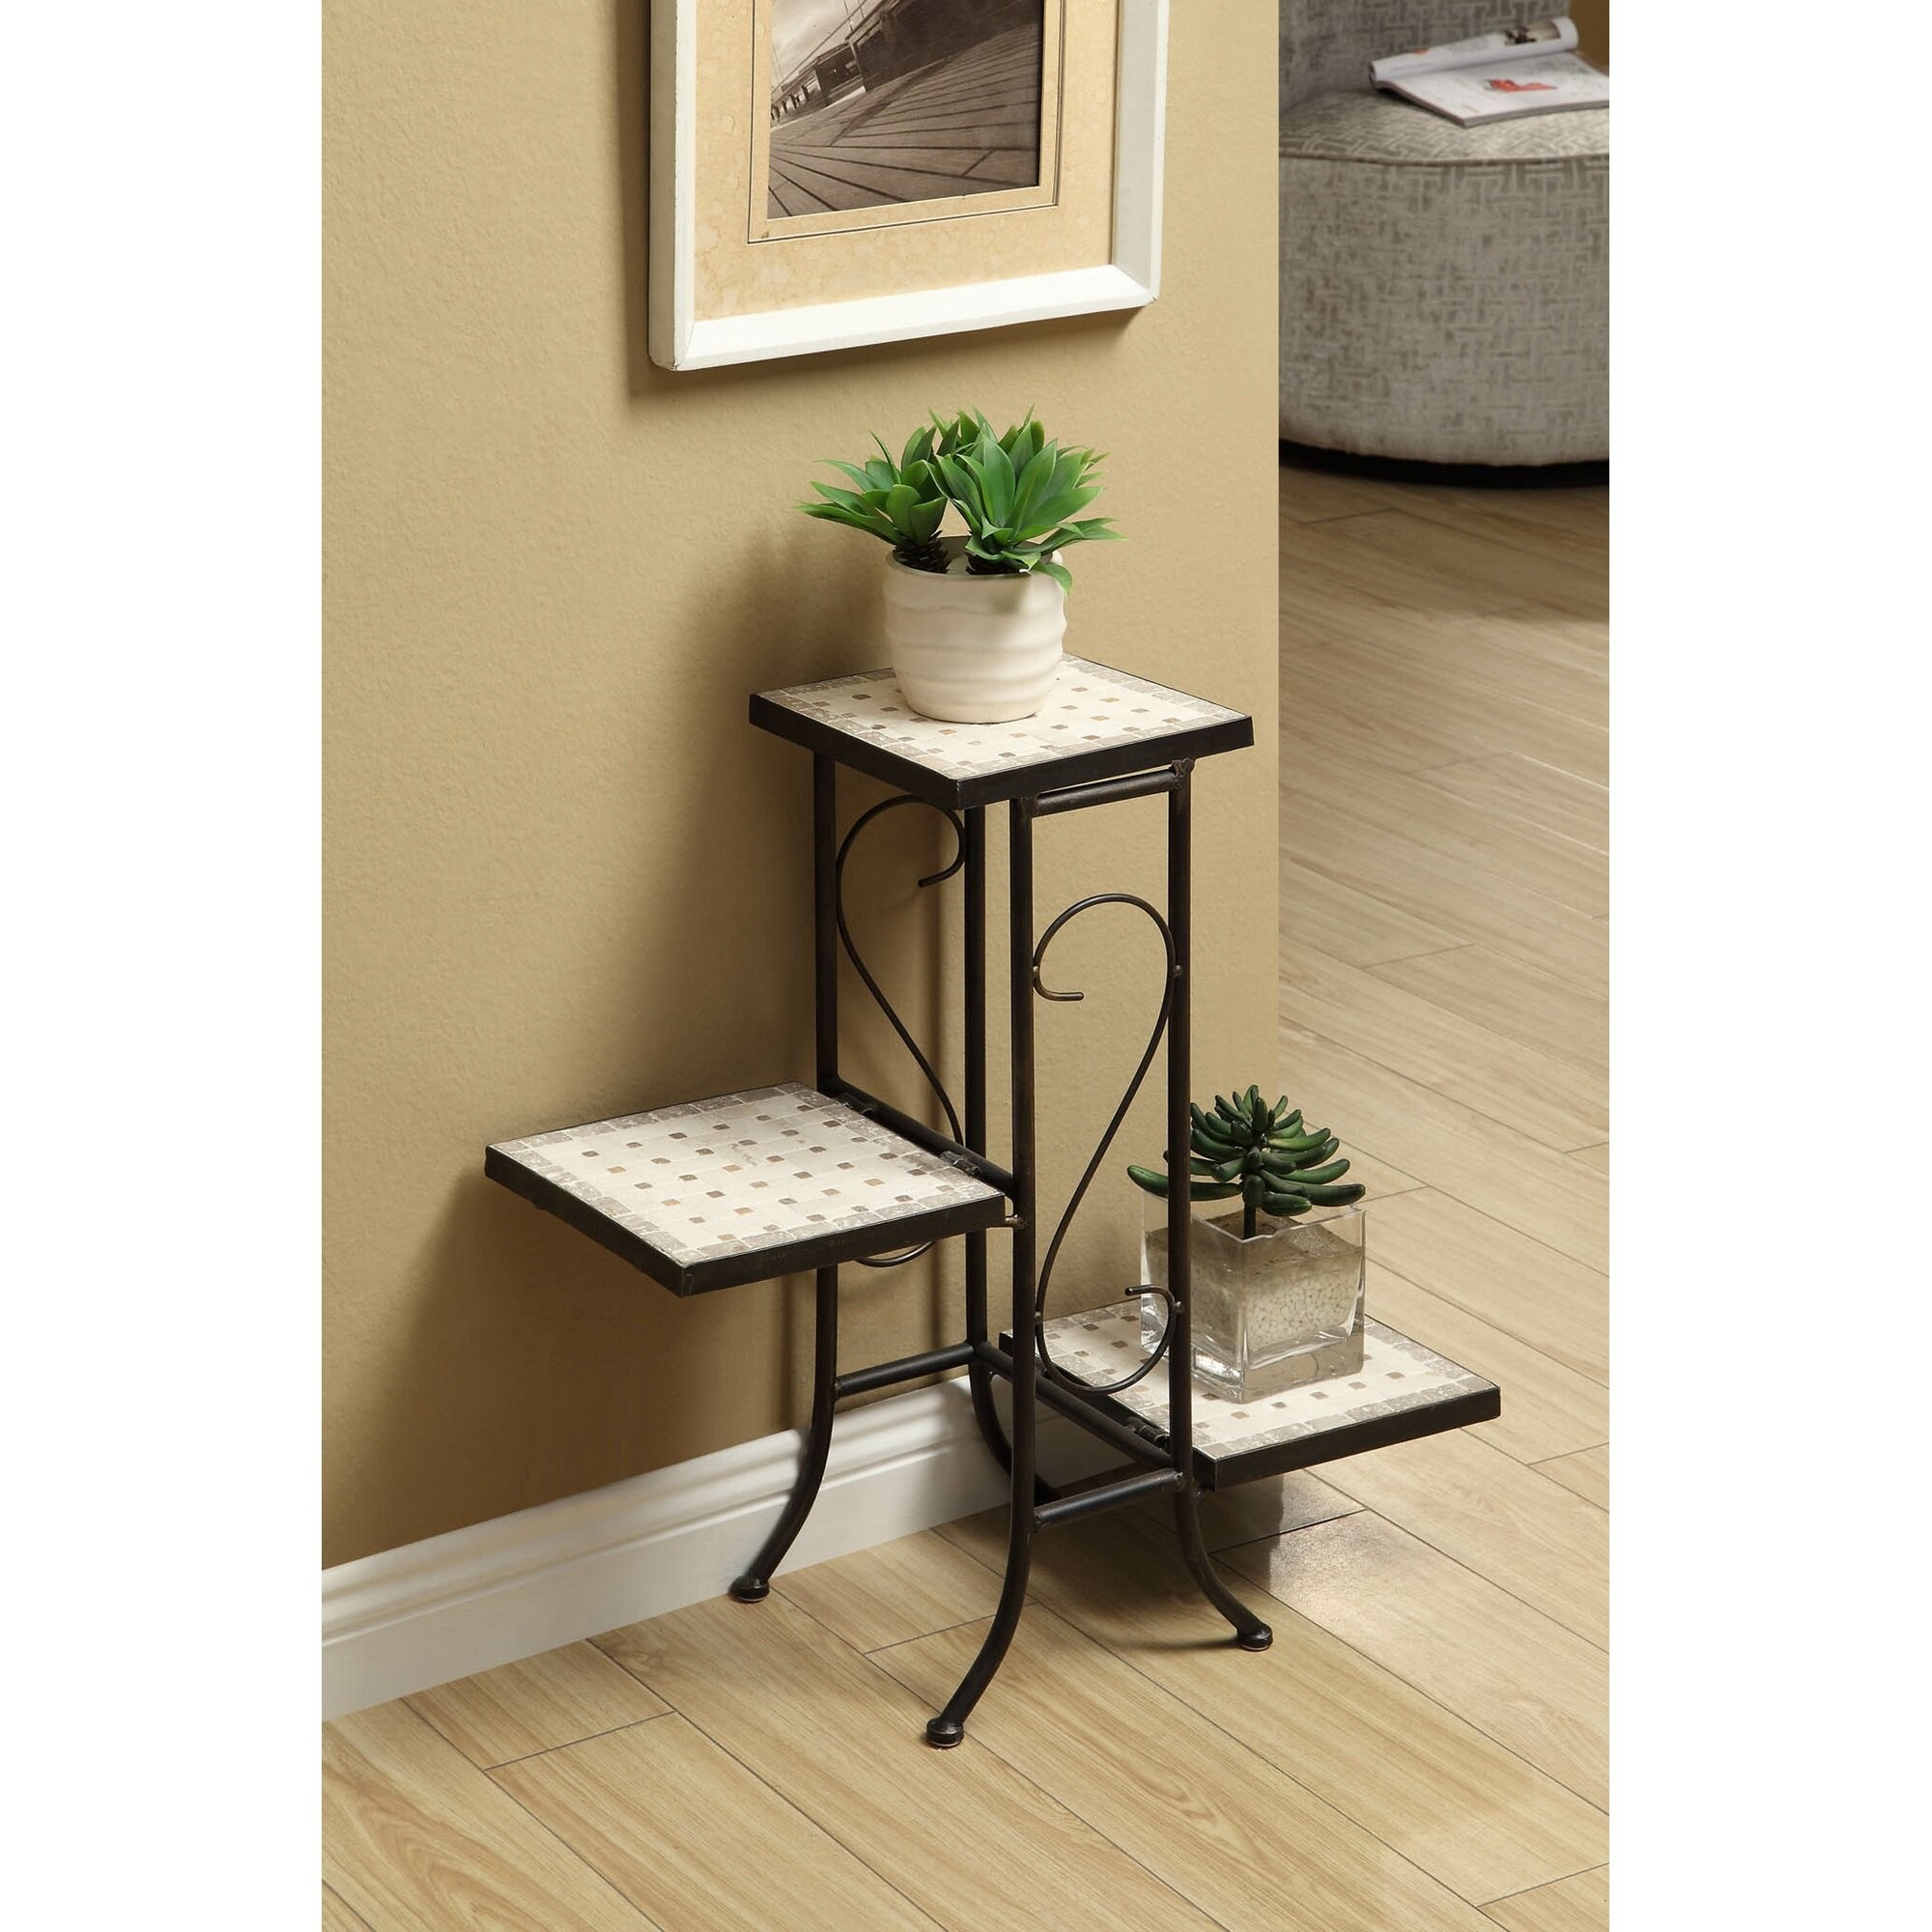 4d concepts multi tier plant stand with travertine top